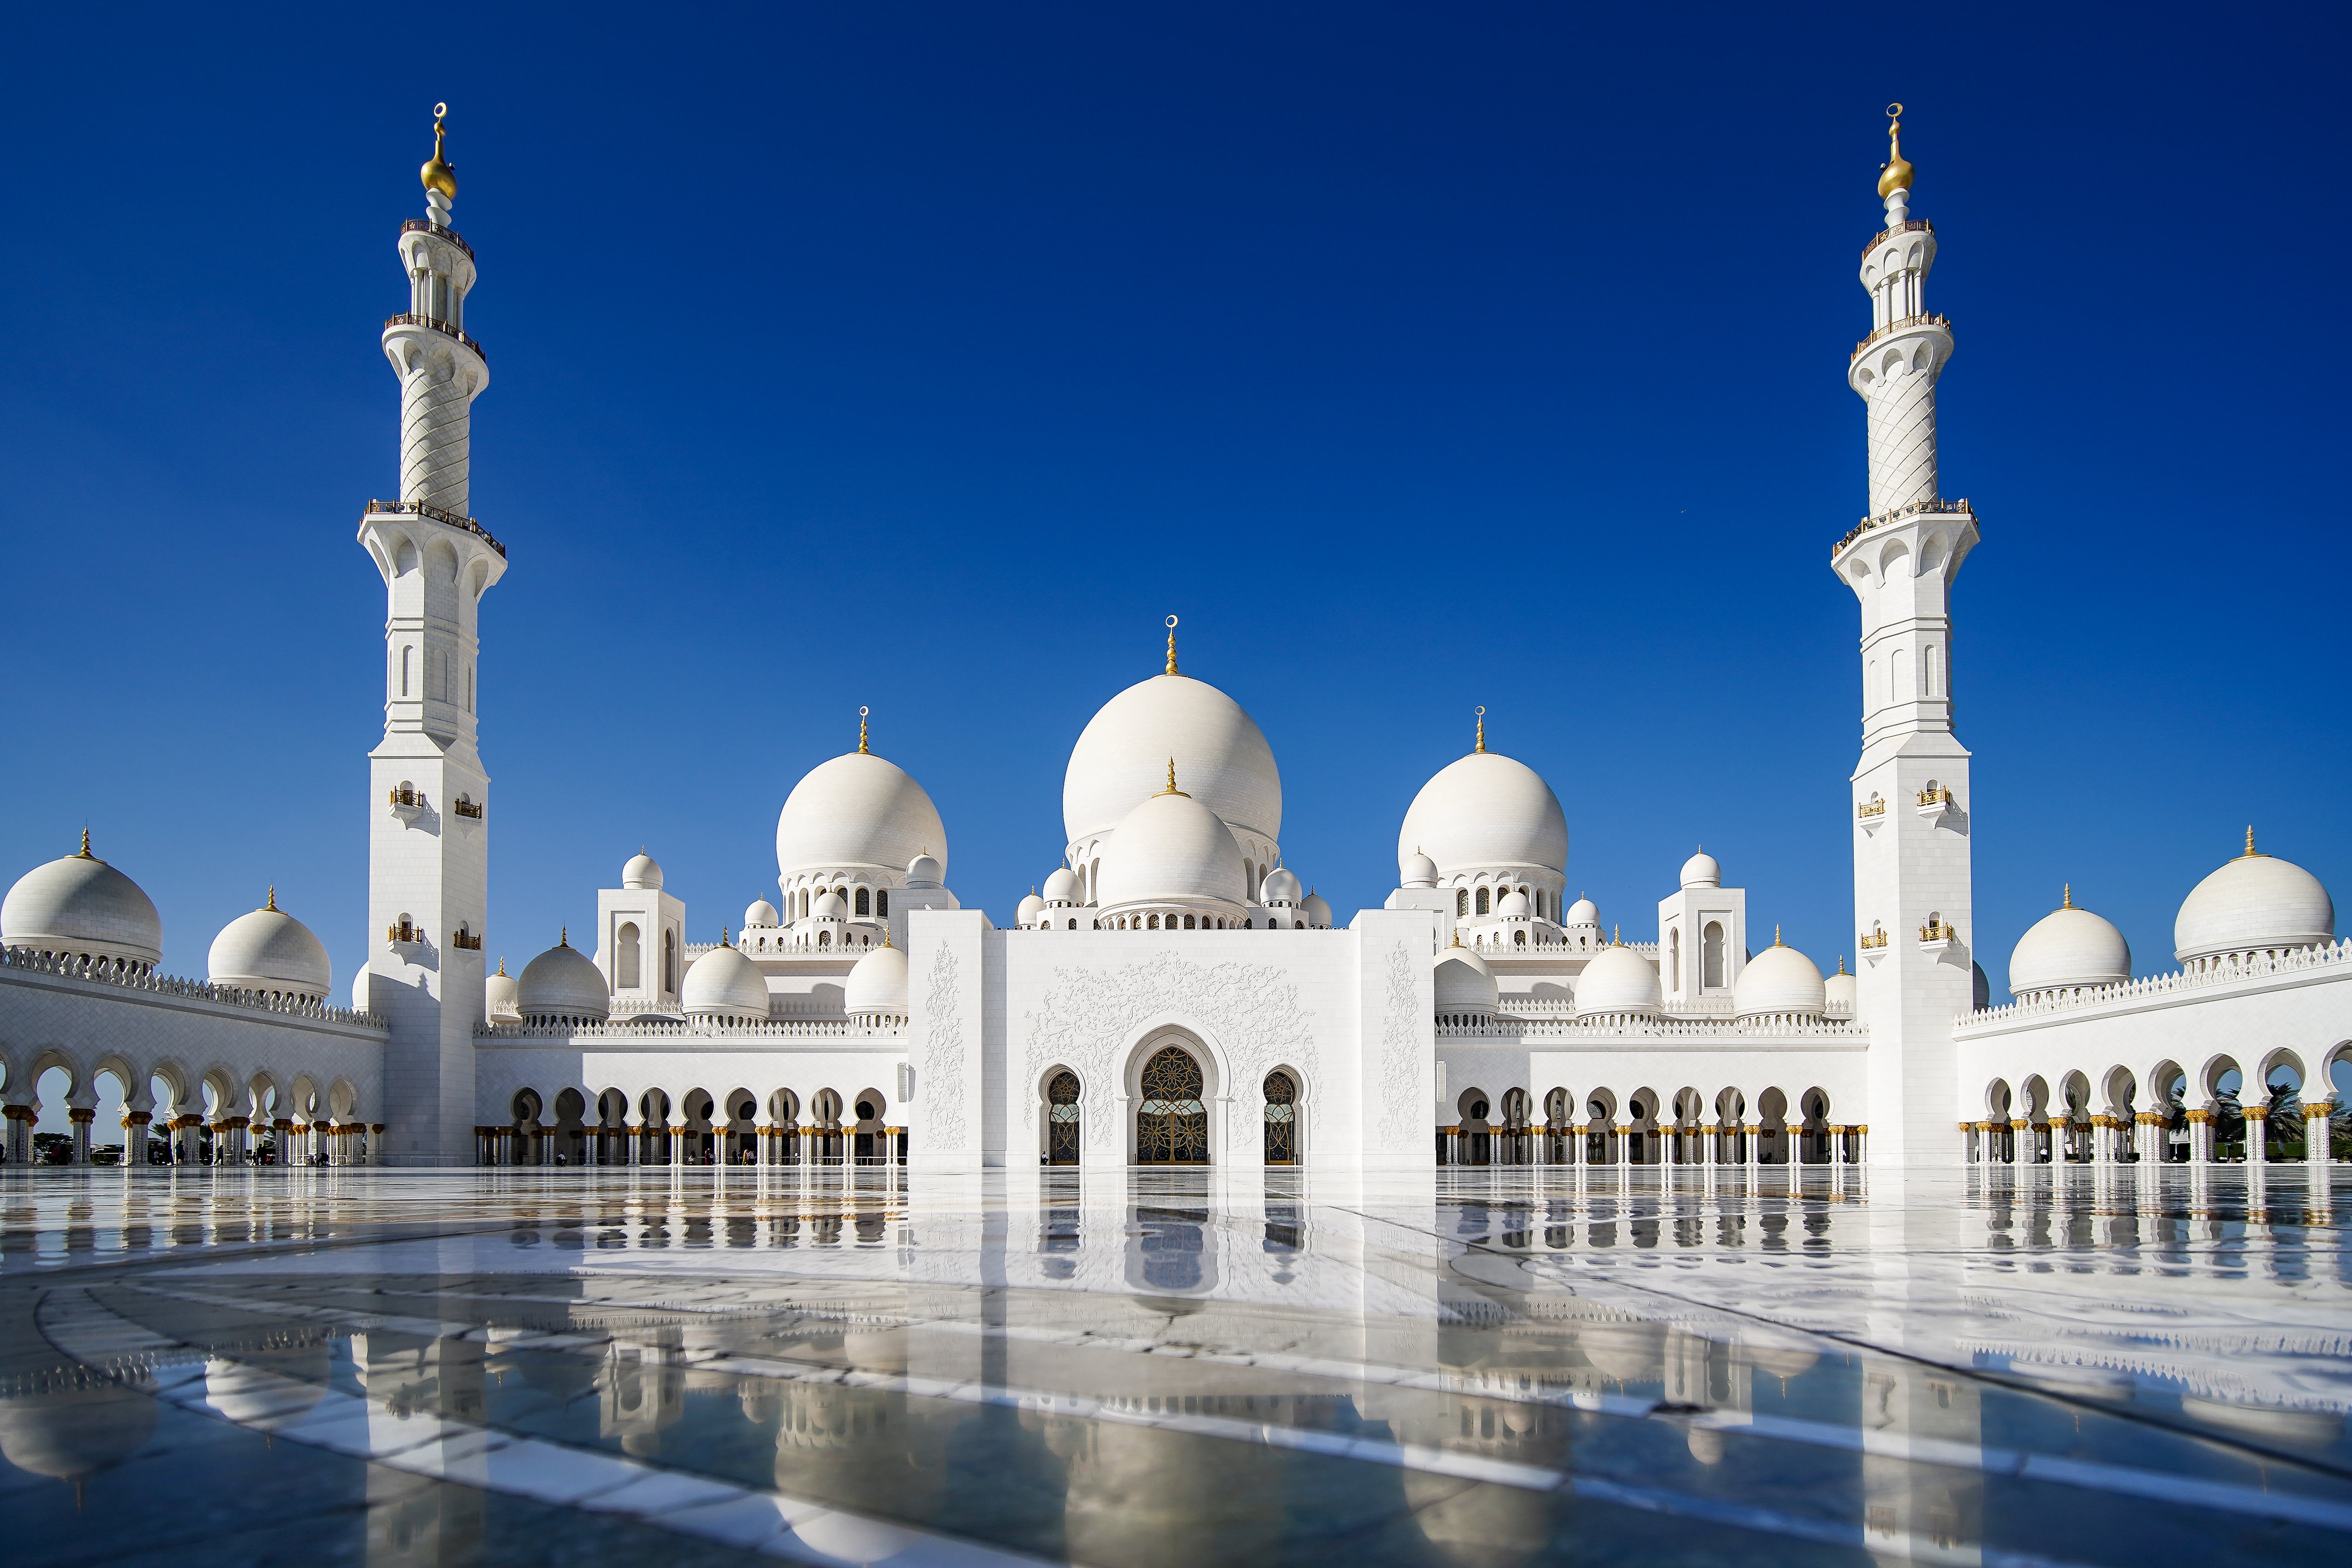 religious, sheikh zayed grand mosque, abu dhabi, architecture, mosque, reflection, sky, united arab emirates, mosques